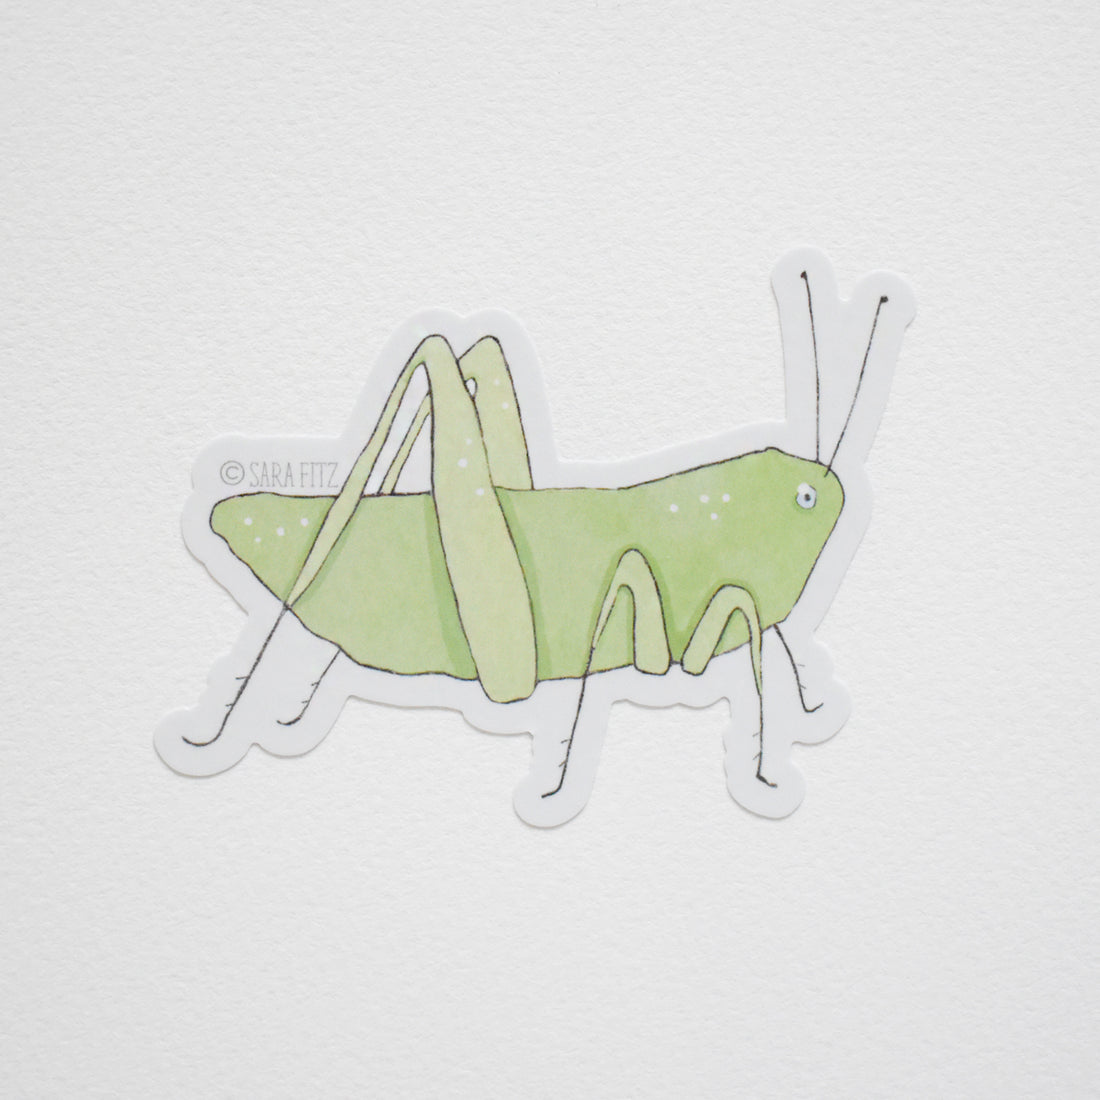 How to draw a Grasshopper step by step – Easy Animals 2 Draw